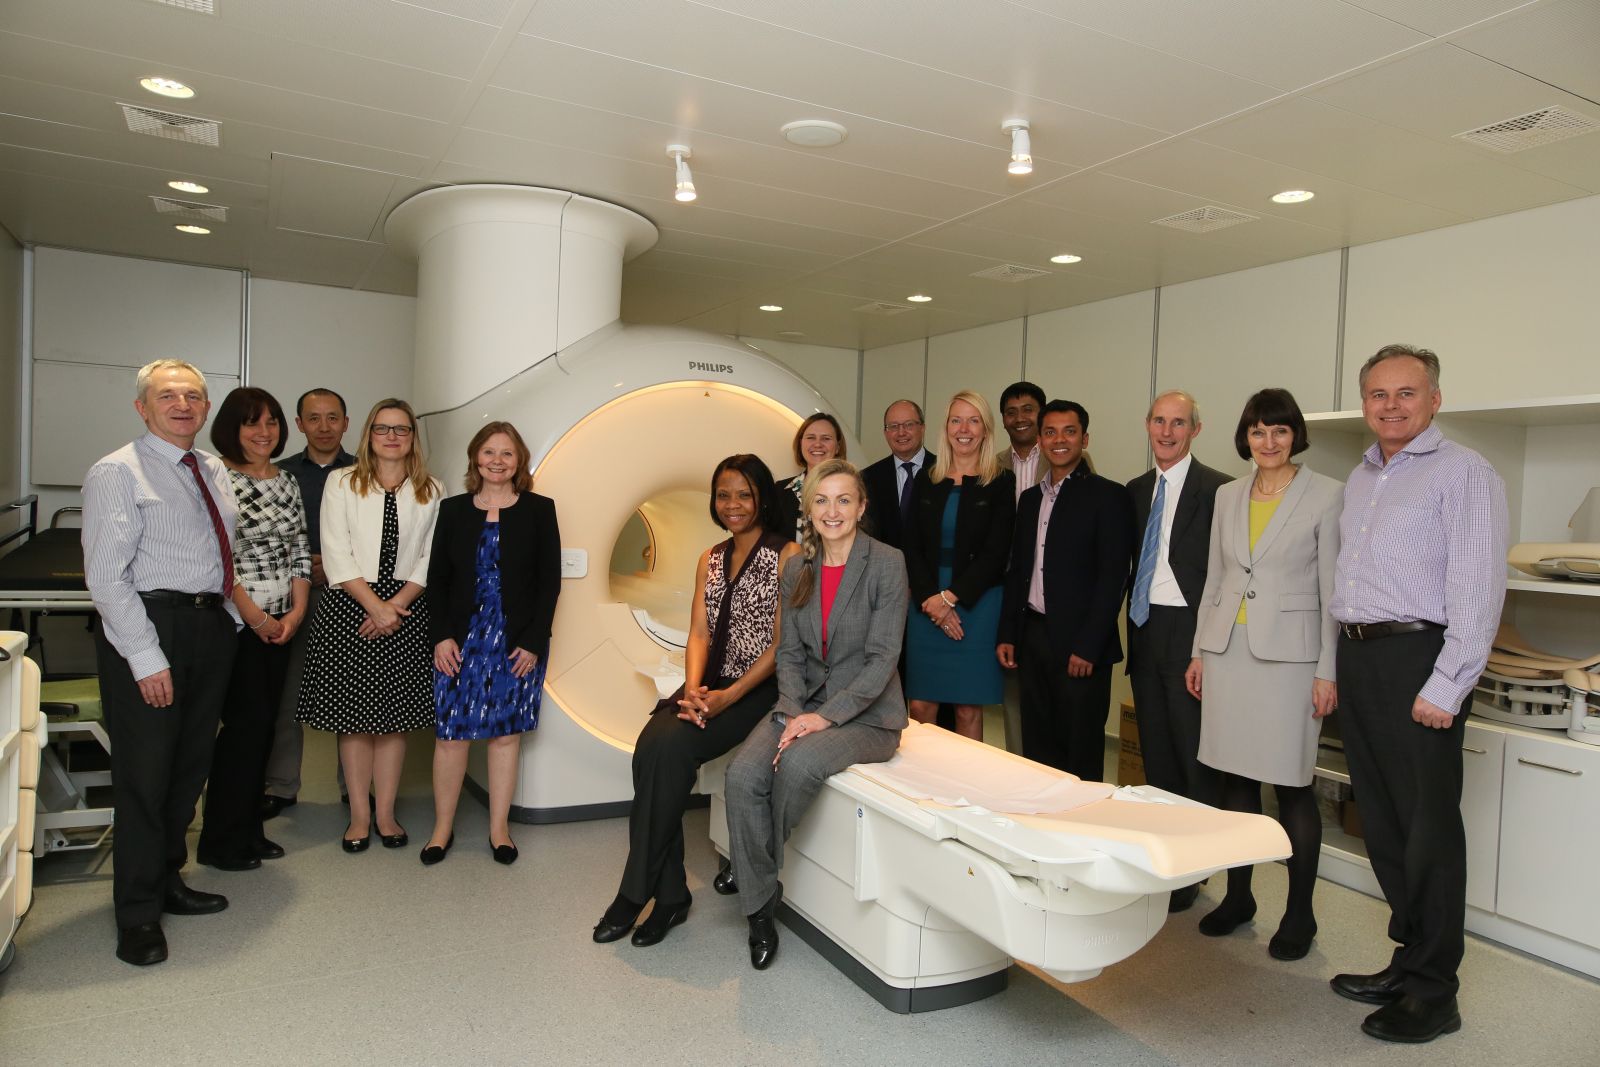 launch of the new MRI scanner at Parkside Hospital